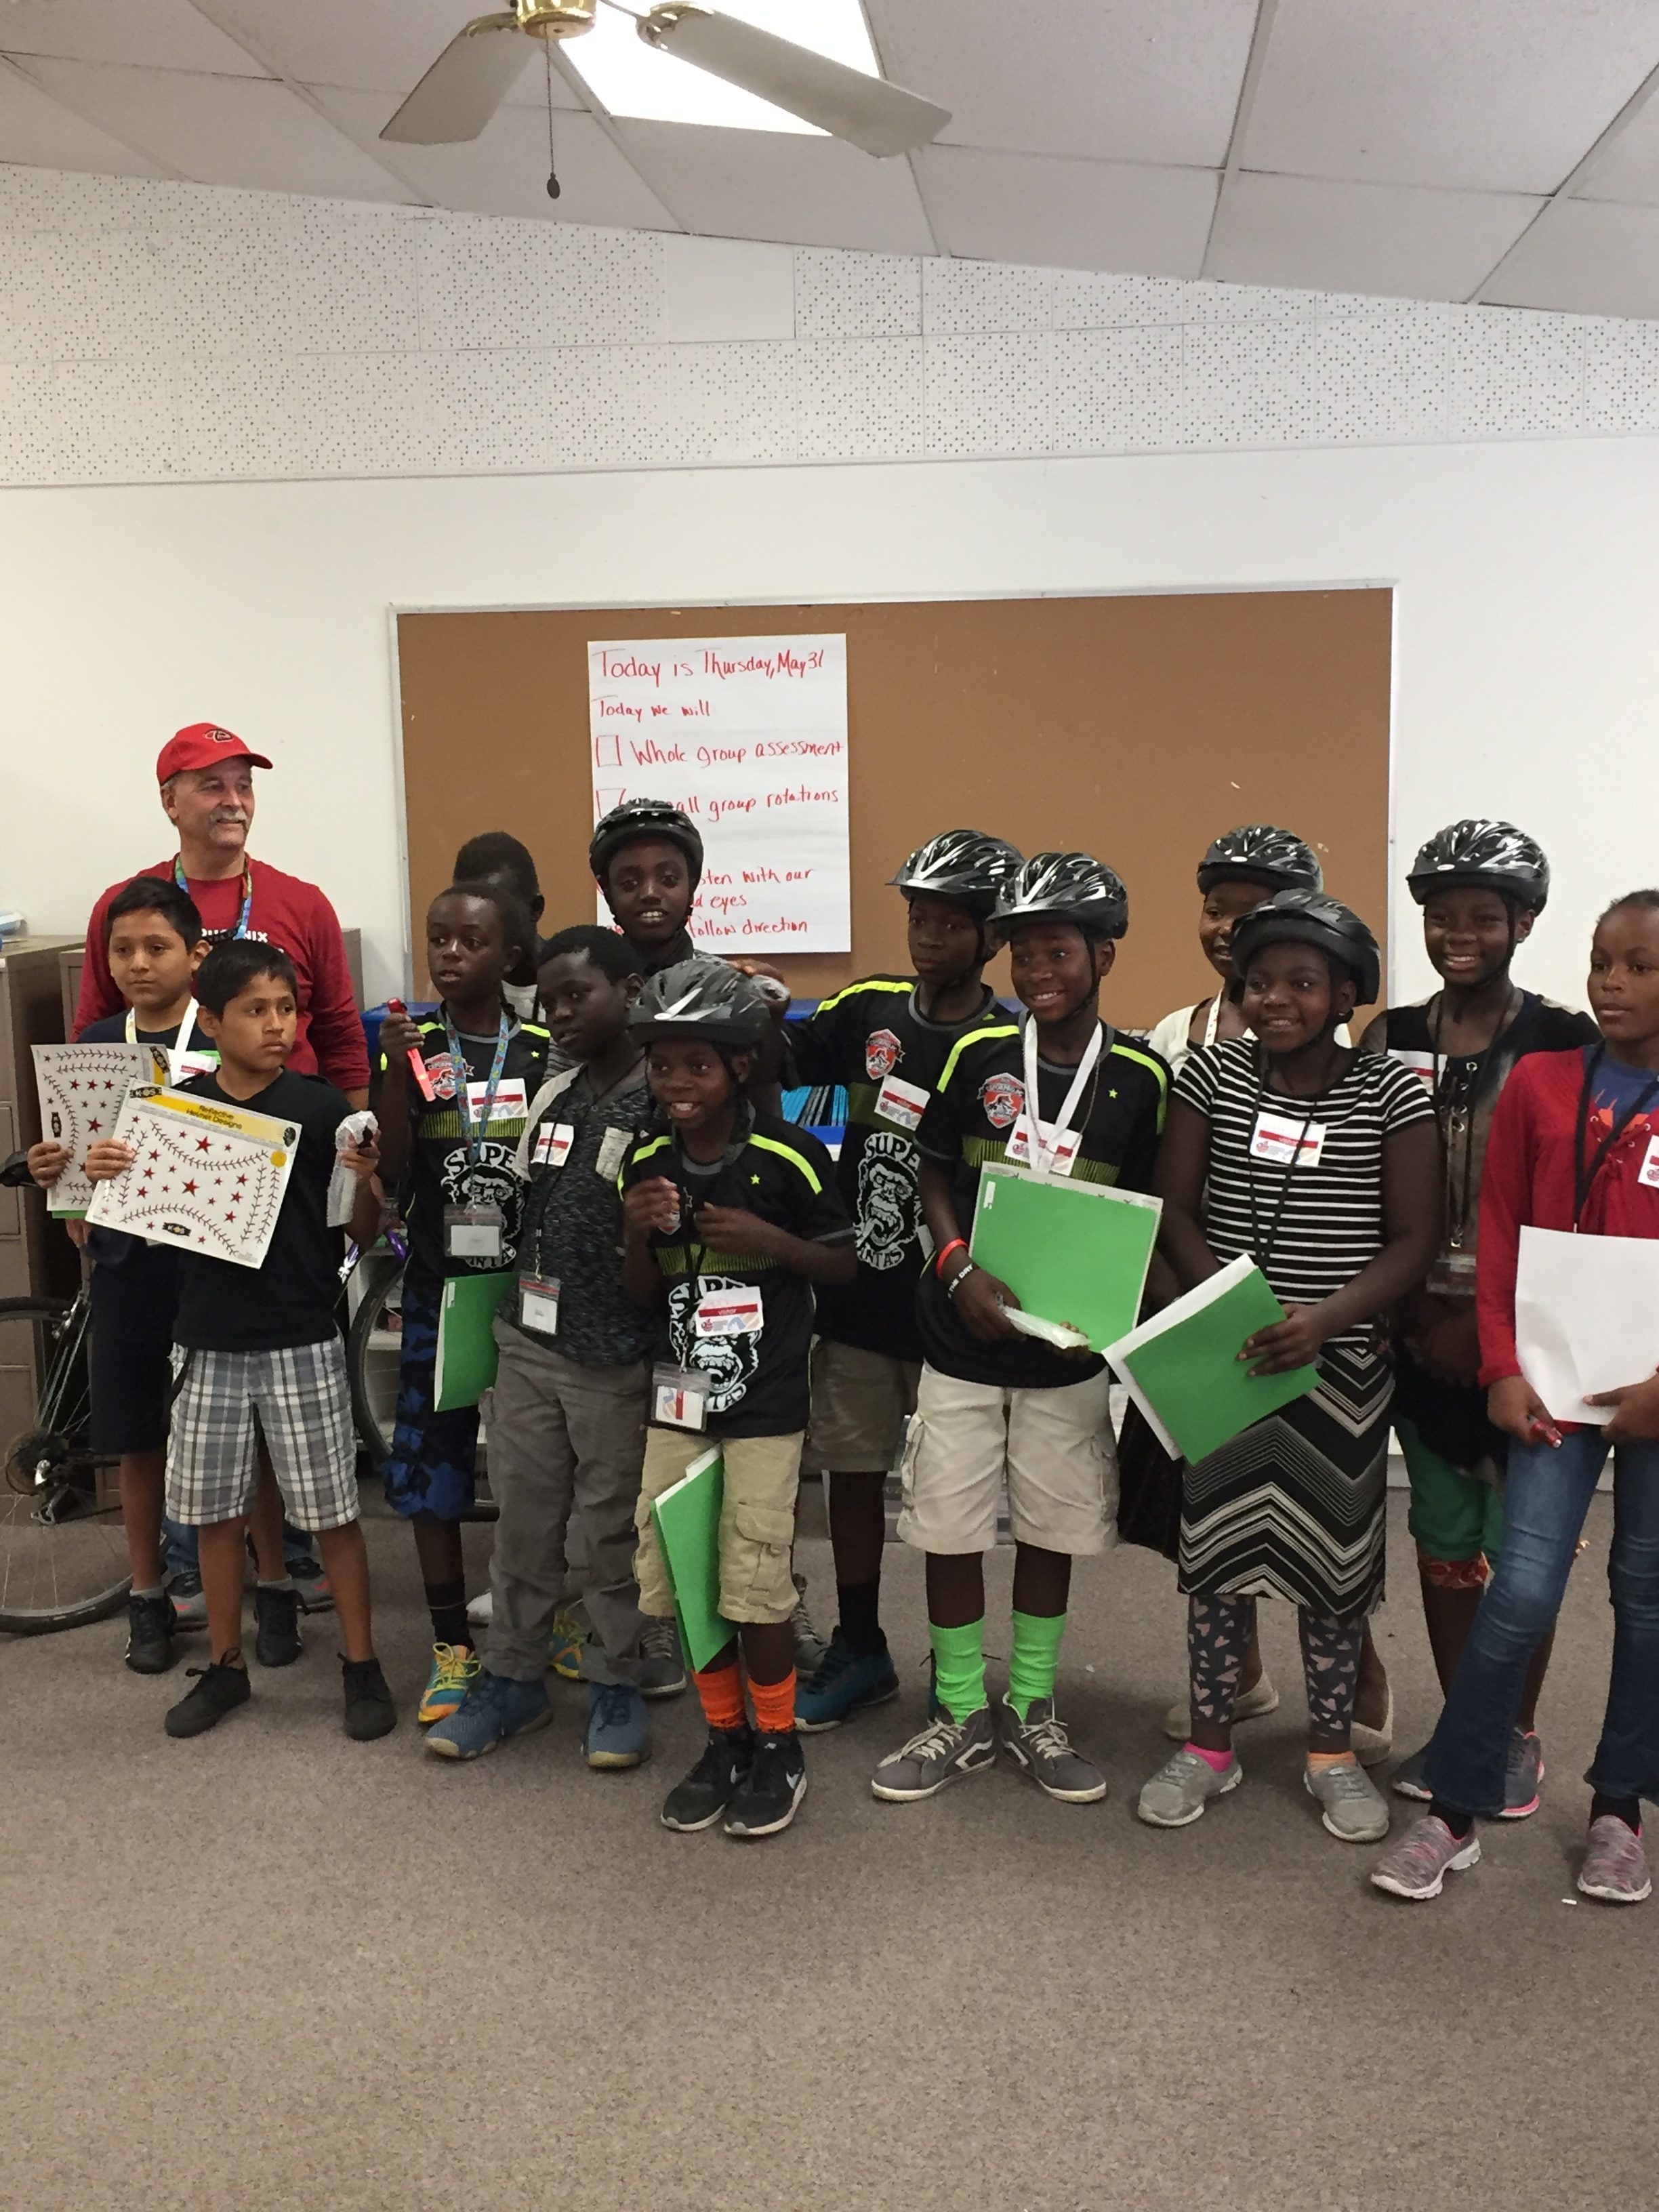 Sixth grade students from Washington School District received new helmets and bike safety education. Source: John Boyd